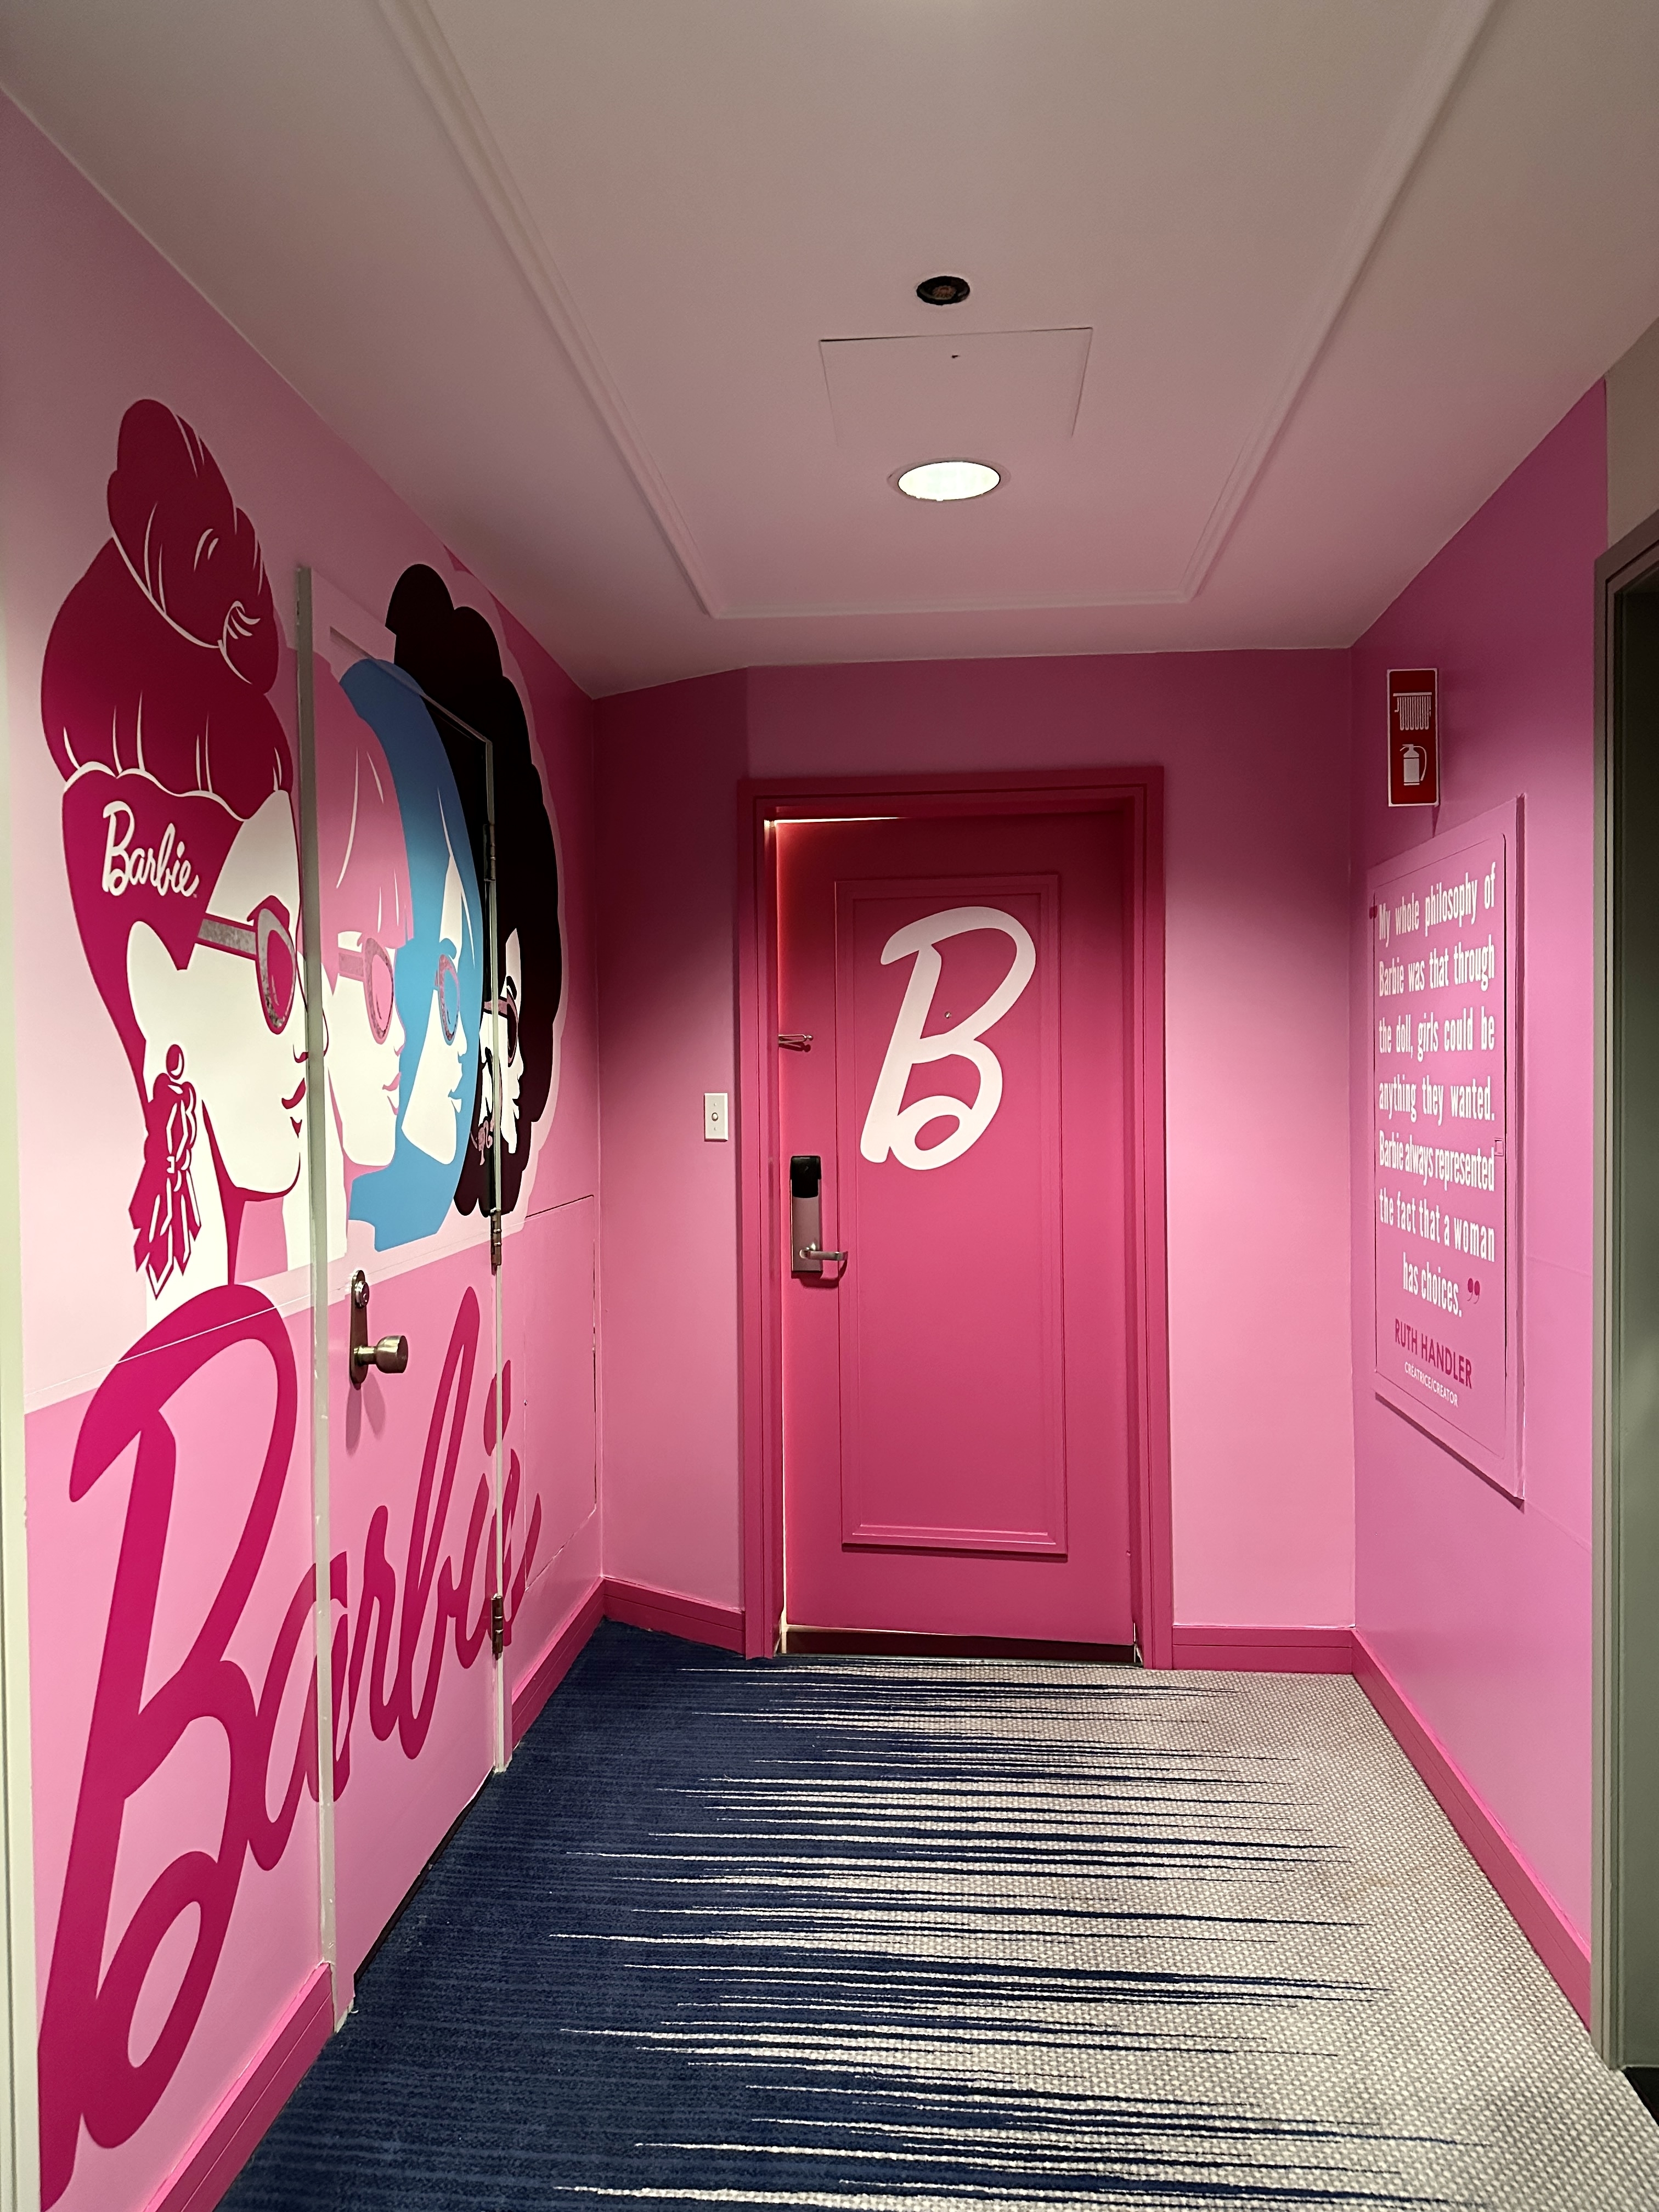 A pink door and pink walls greets you as you enter the Barbie suite.